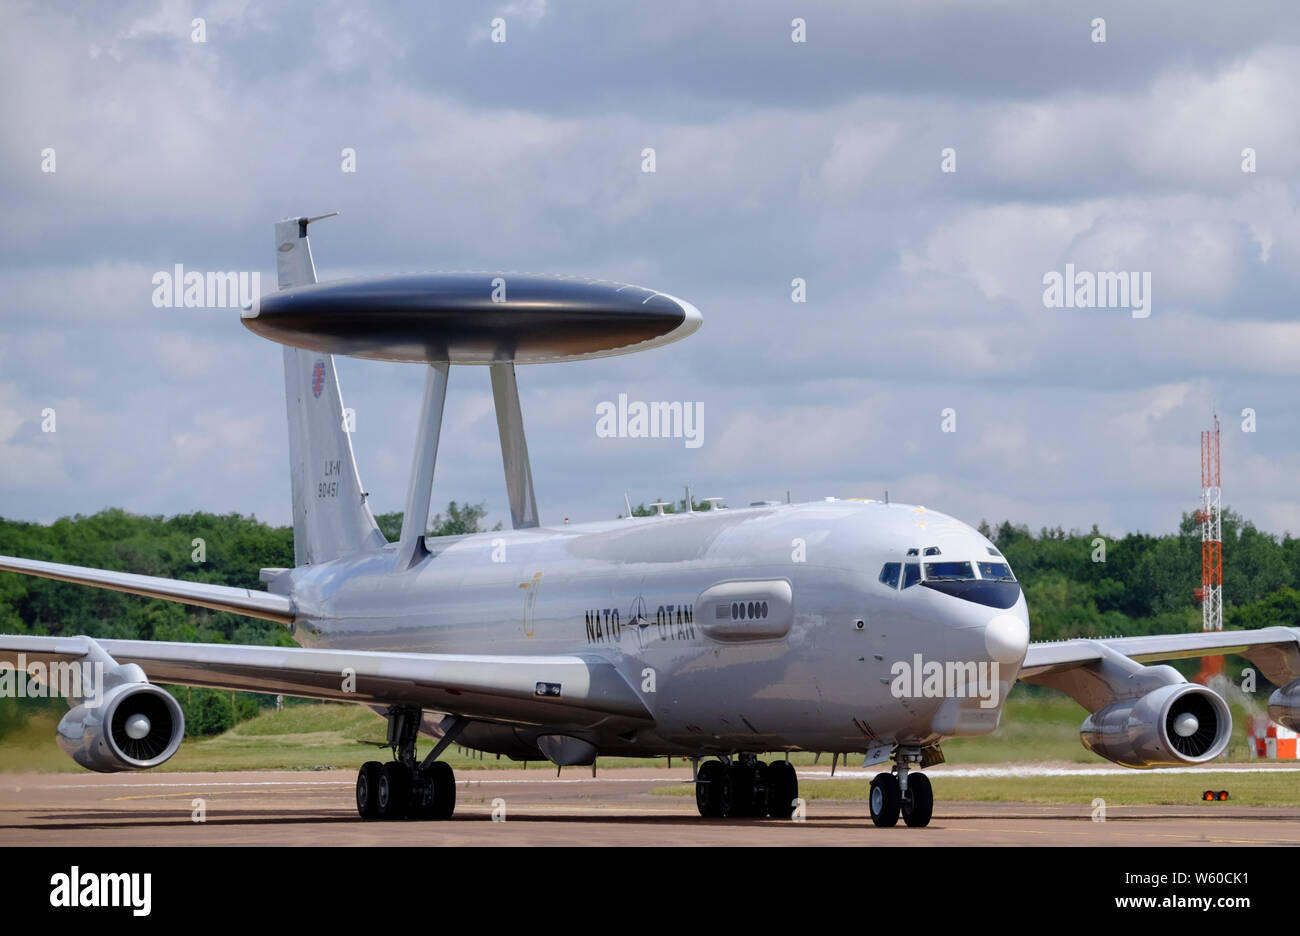 A Boeing E 3 Awacs Operated By Nato Arrives At Raf Fairford Uk Stock Photo Alamy